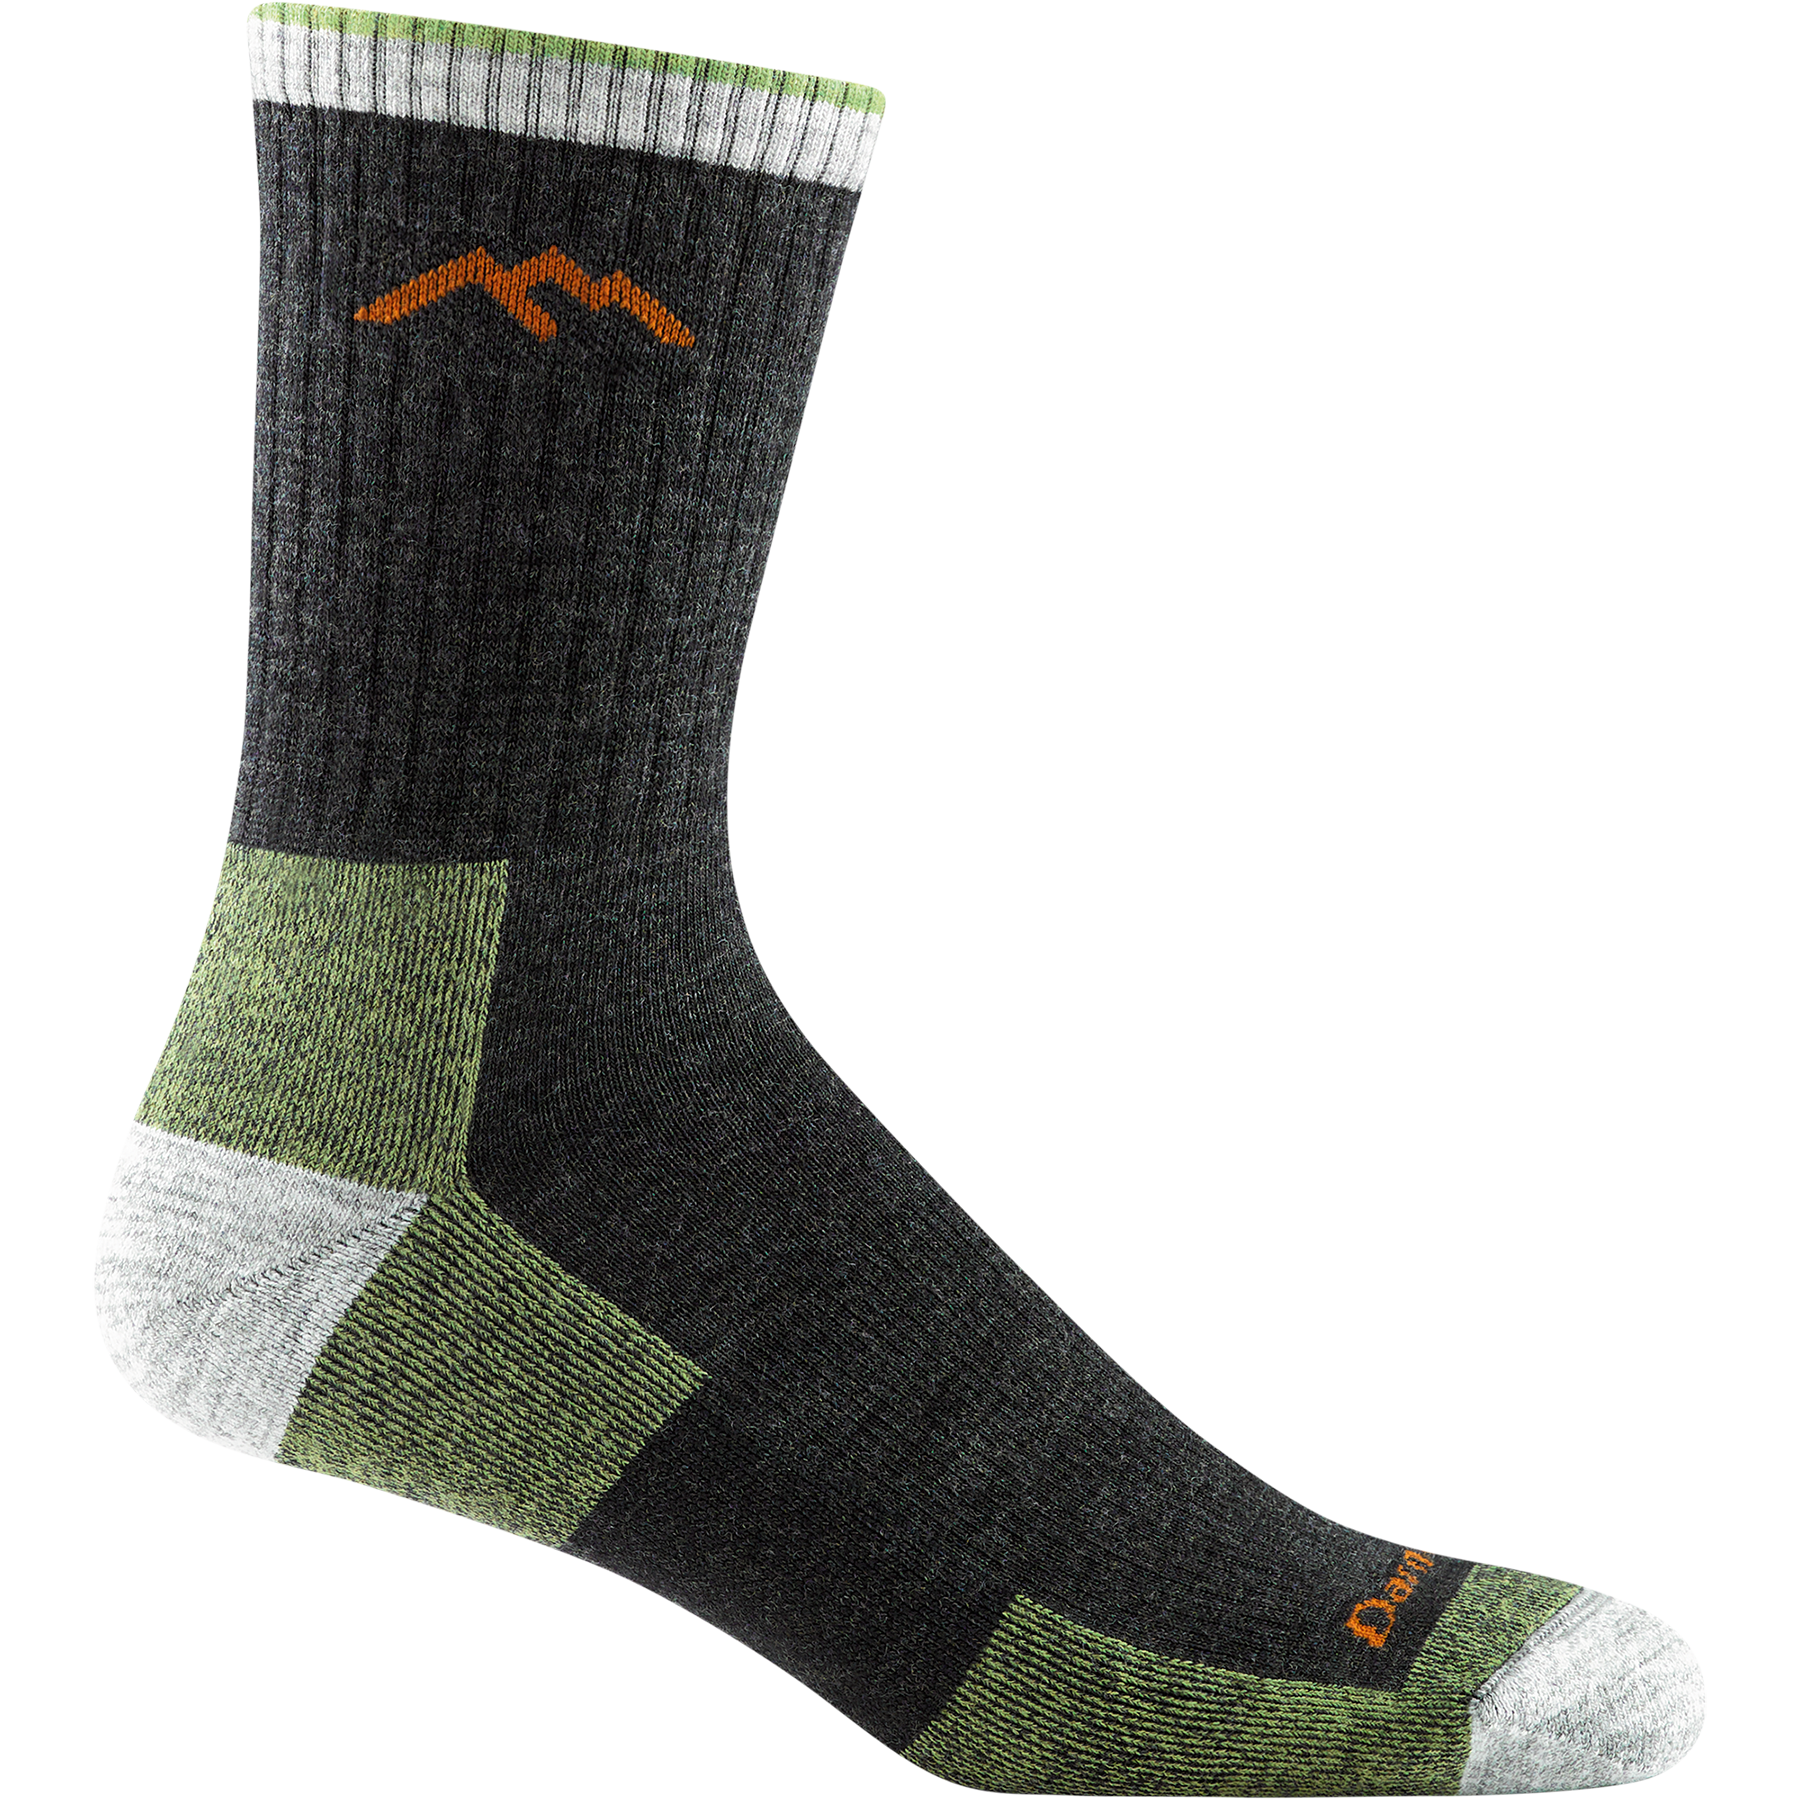 Darn tough dark gray and lime green sock with orange mountain outline detail, white toe and heel